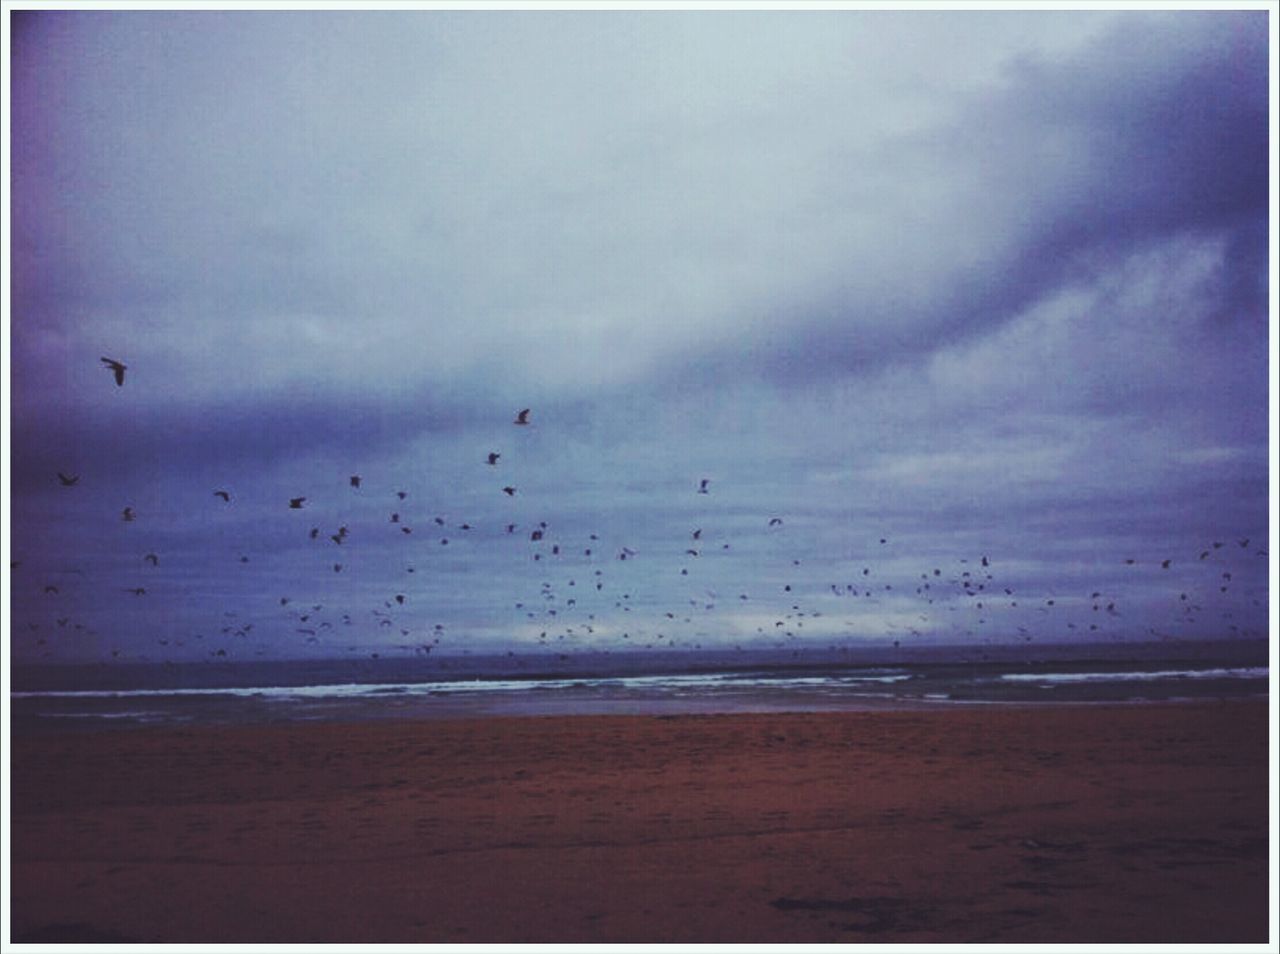 bird, animal themes, sky, animals in the wild, wildlife, sea, flying, water, horizon over water, cloud - sky, transfer print, auto post production filter, beach, beauty in nature, nature, scenics, tranquil scene, cloudy, flock of birds